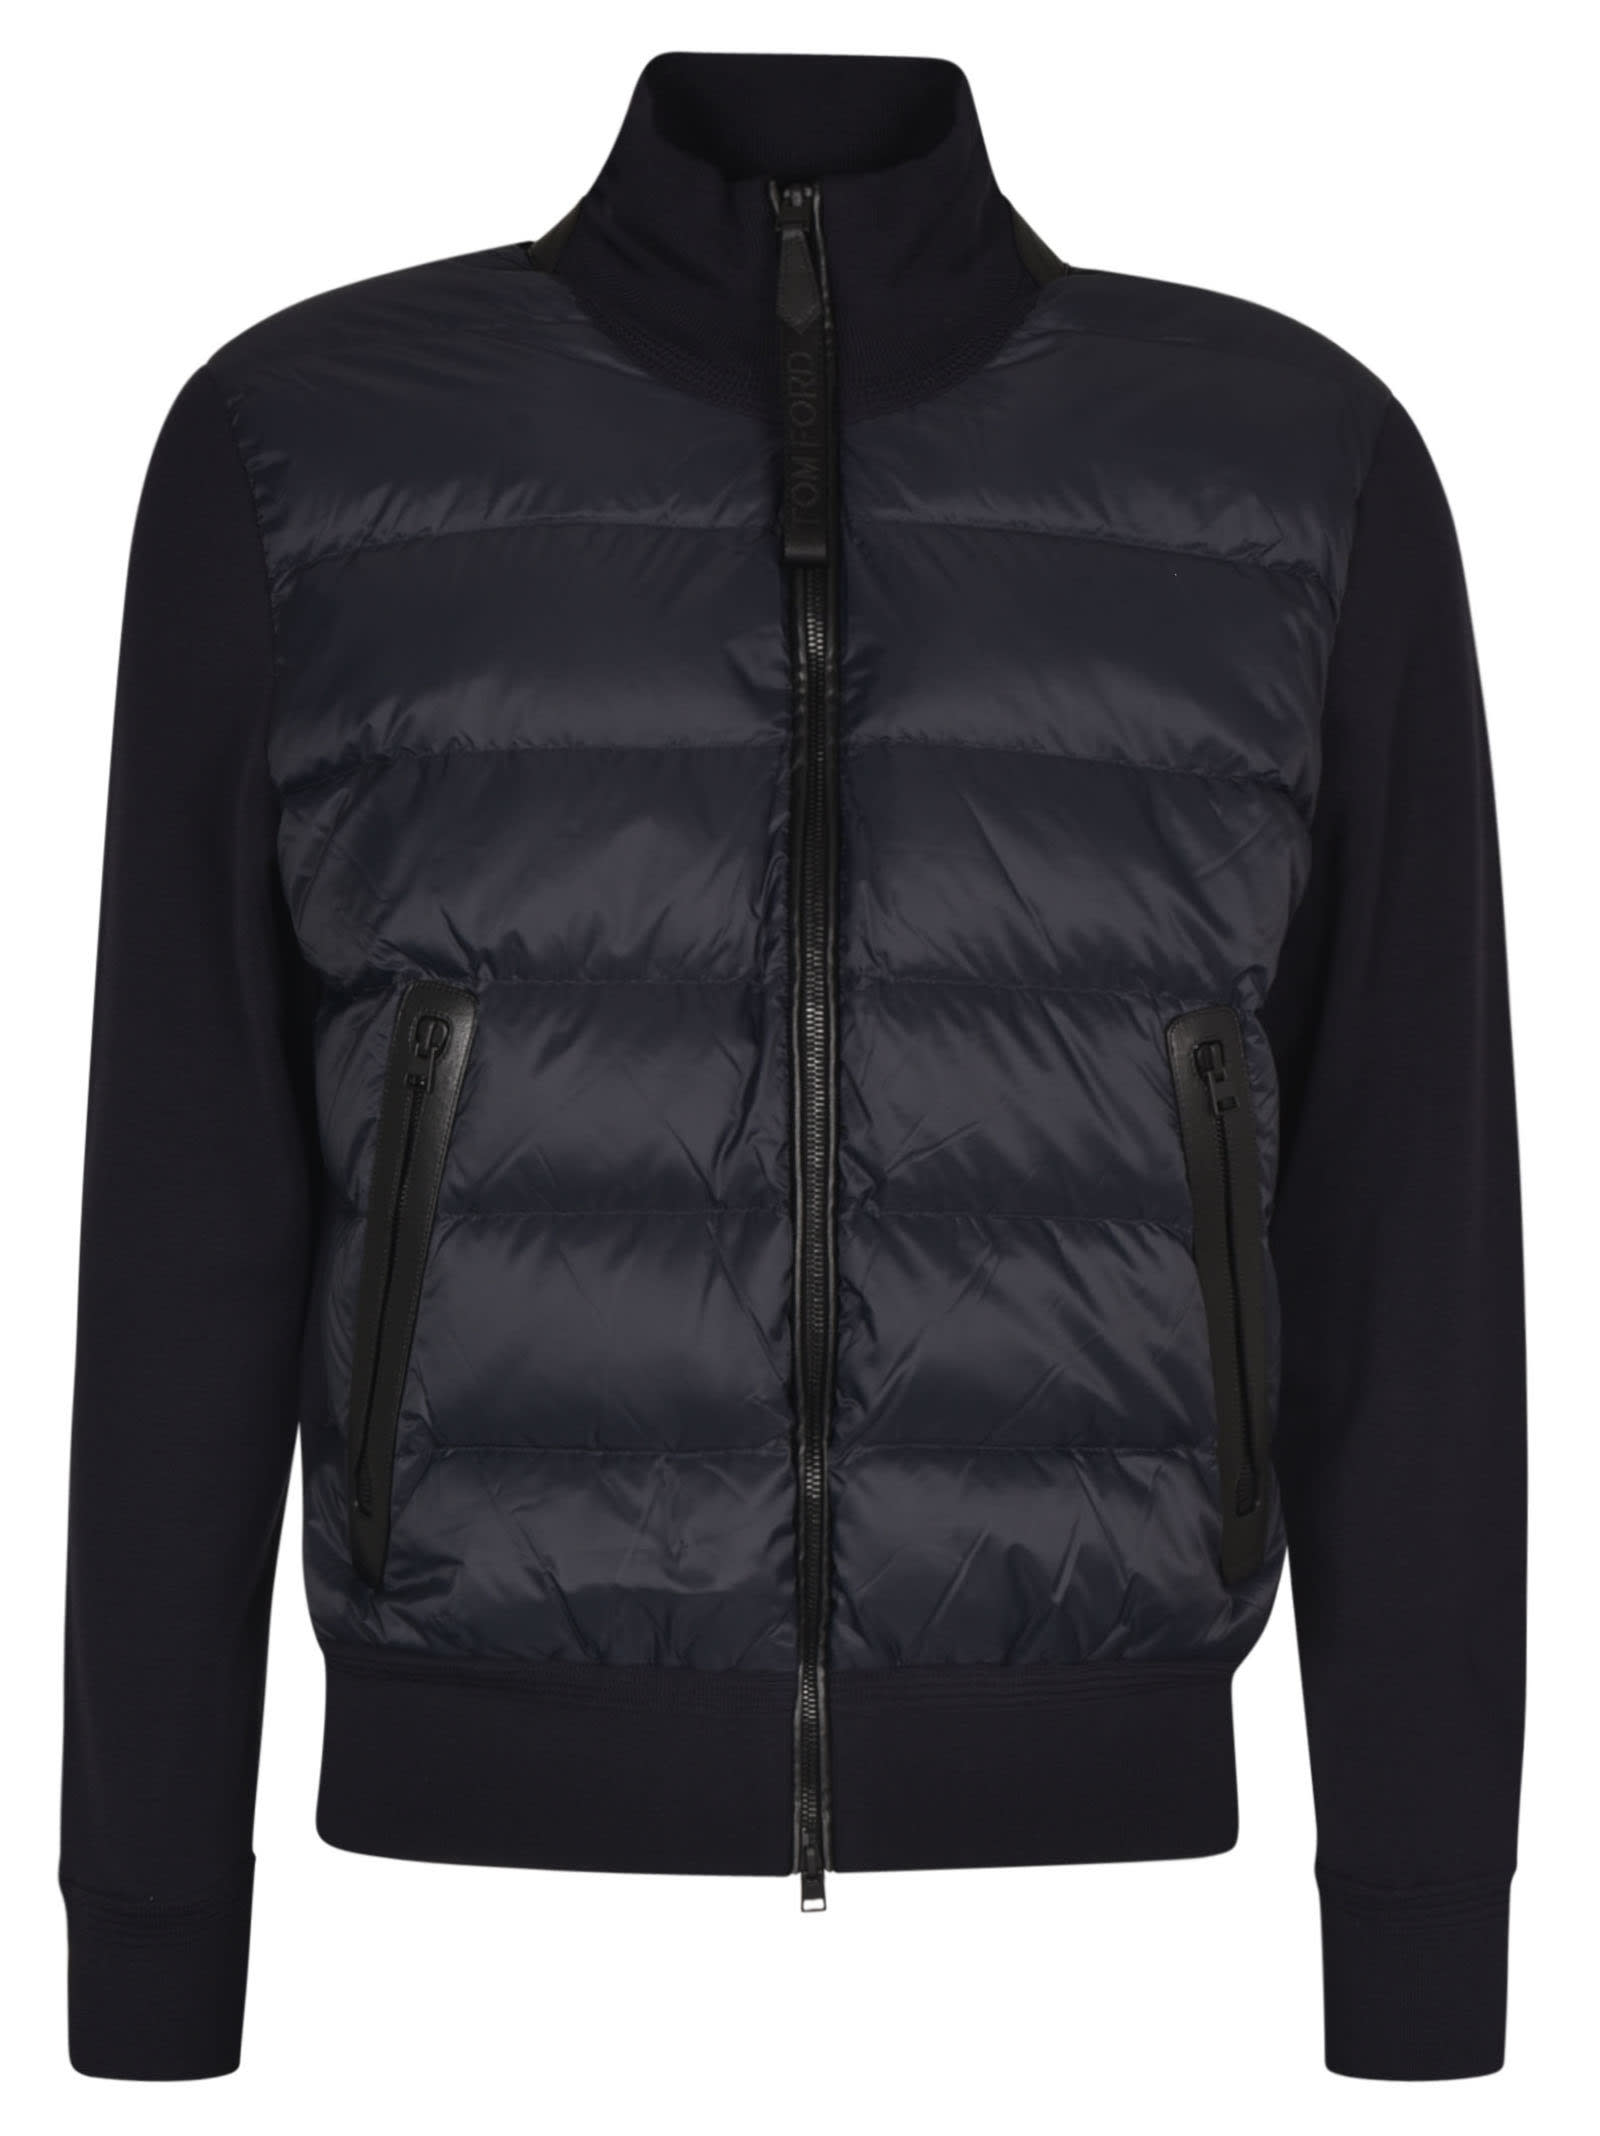 TOM FORD HIGH NECK ZIP PADDED JACKET